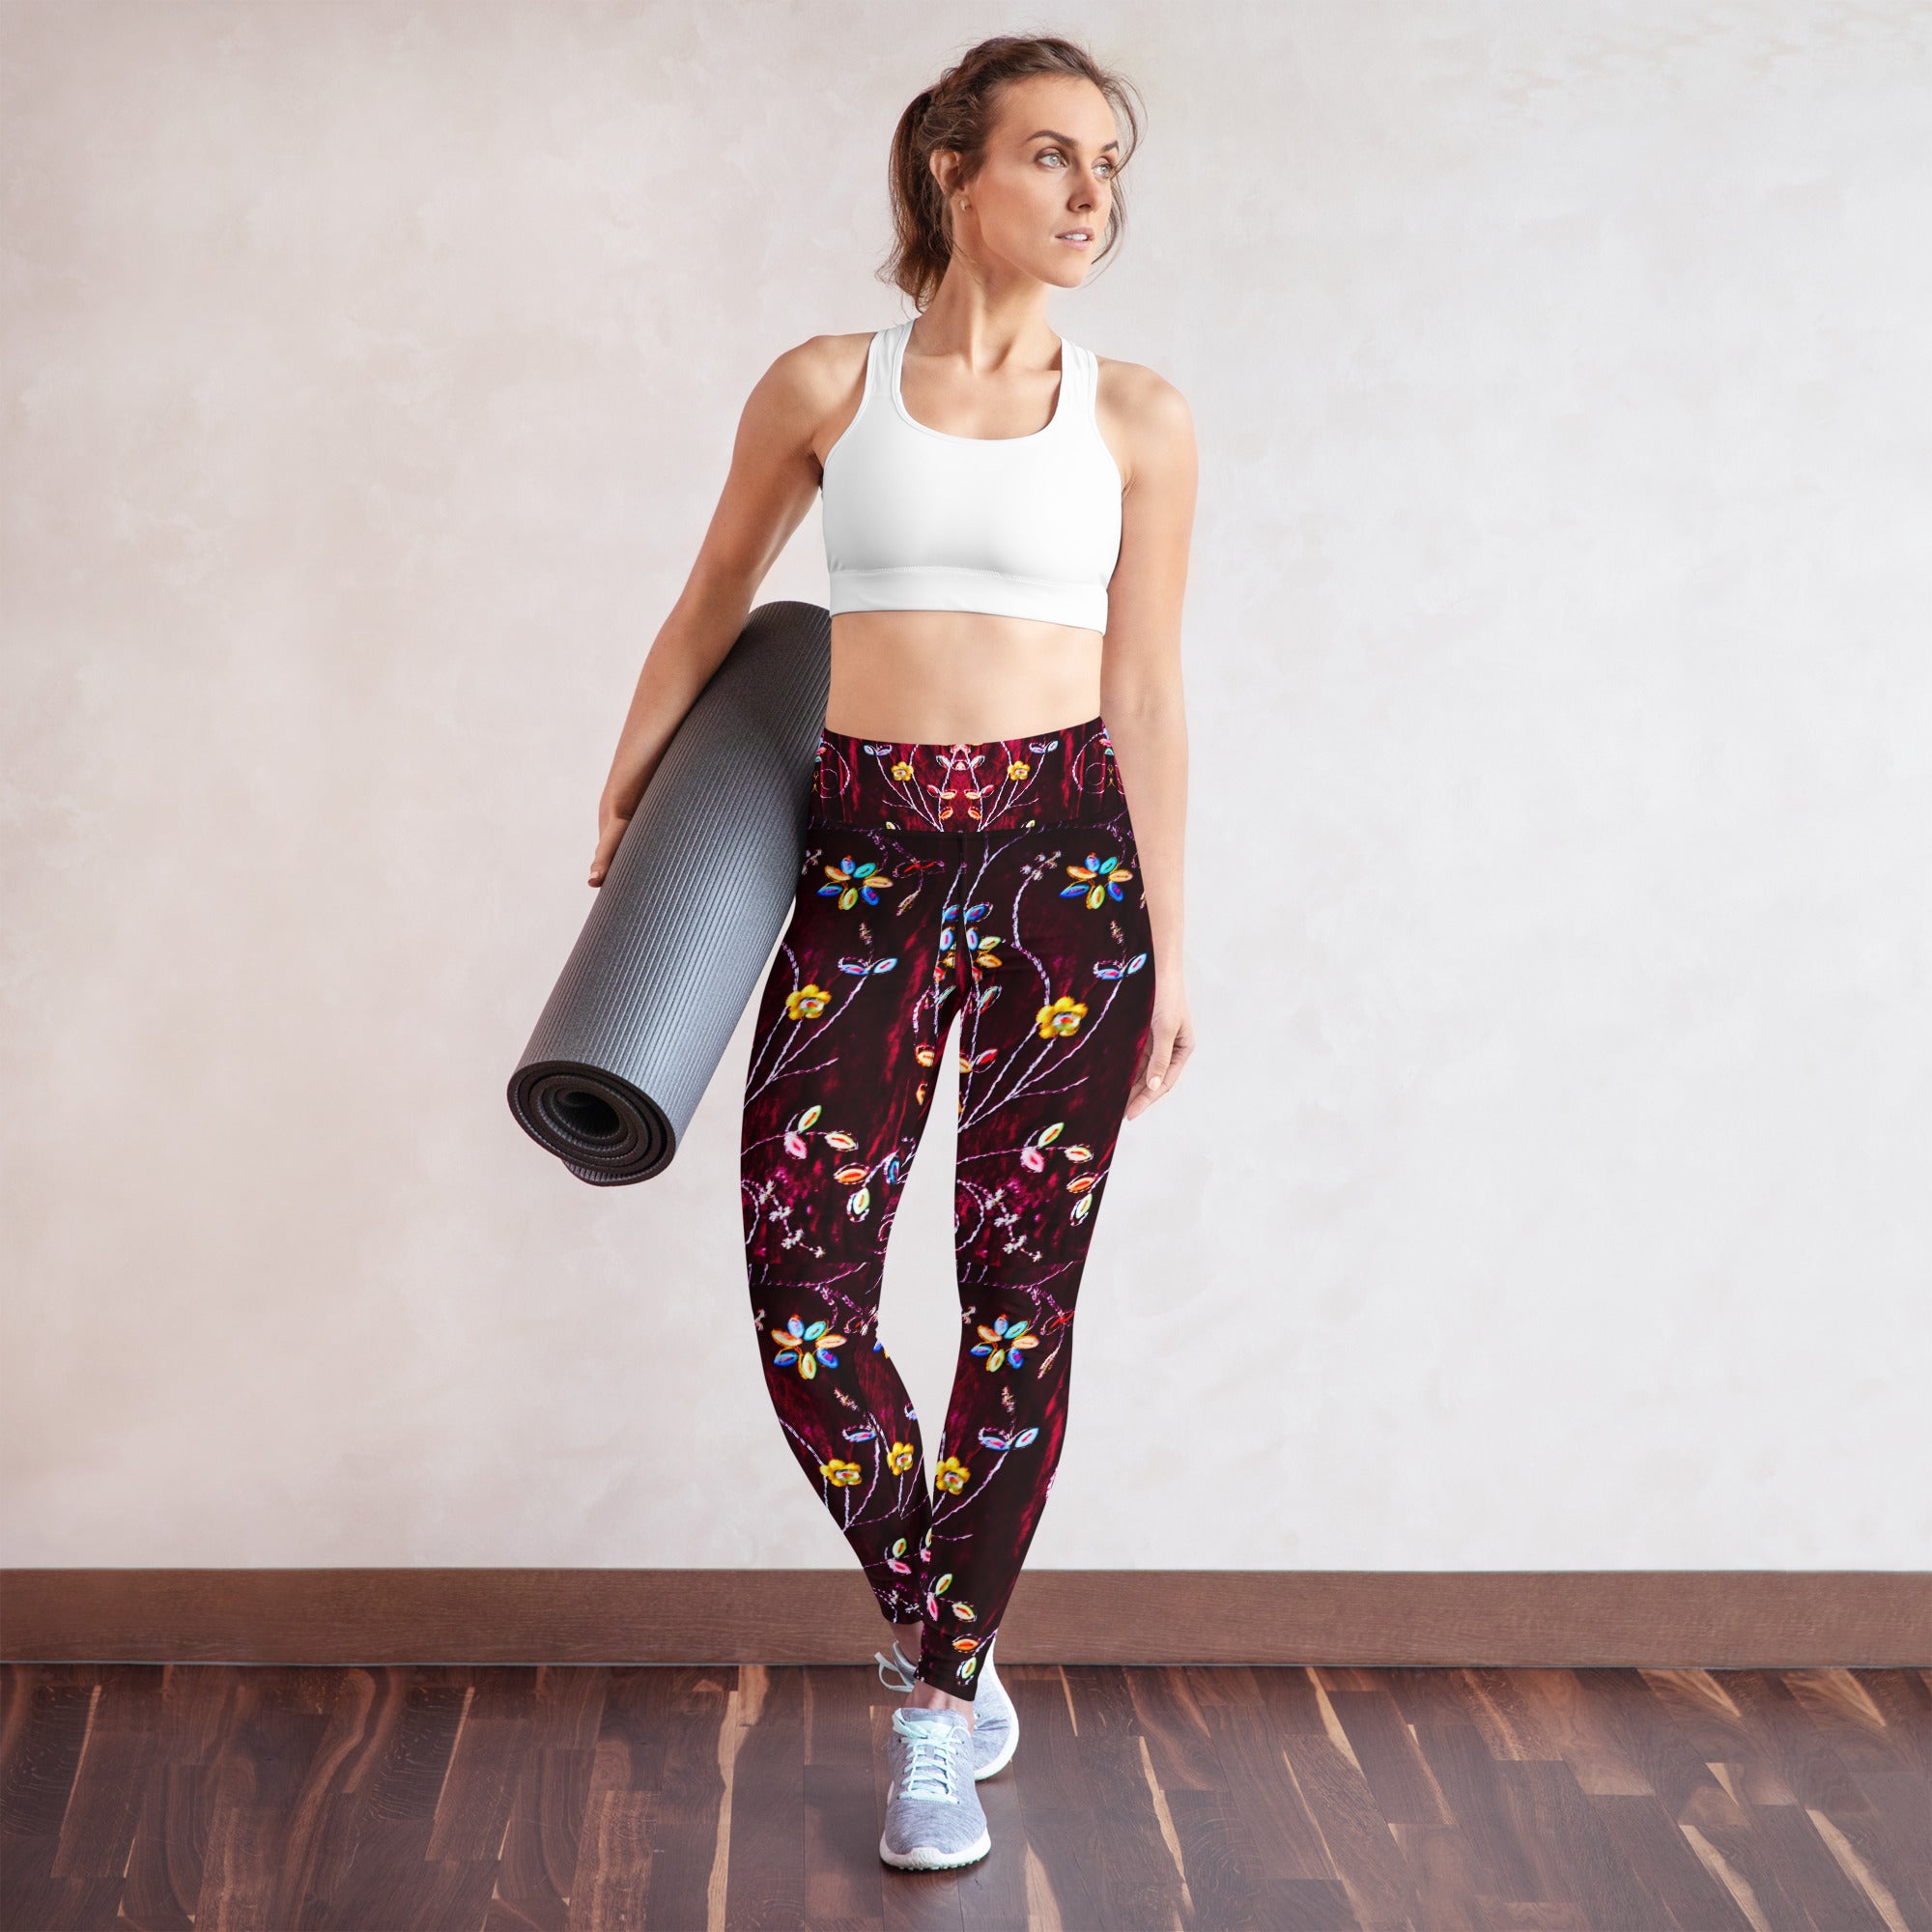  Comfy Yoga Pants - High Waisted Yoga Leggings with Bohemian  Print - Extra Soft - Dry Fit (Fable, S/M 4-10) : Clothing, Shoes & Jewelry